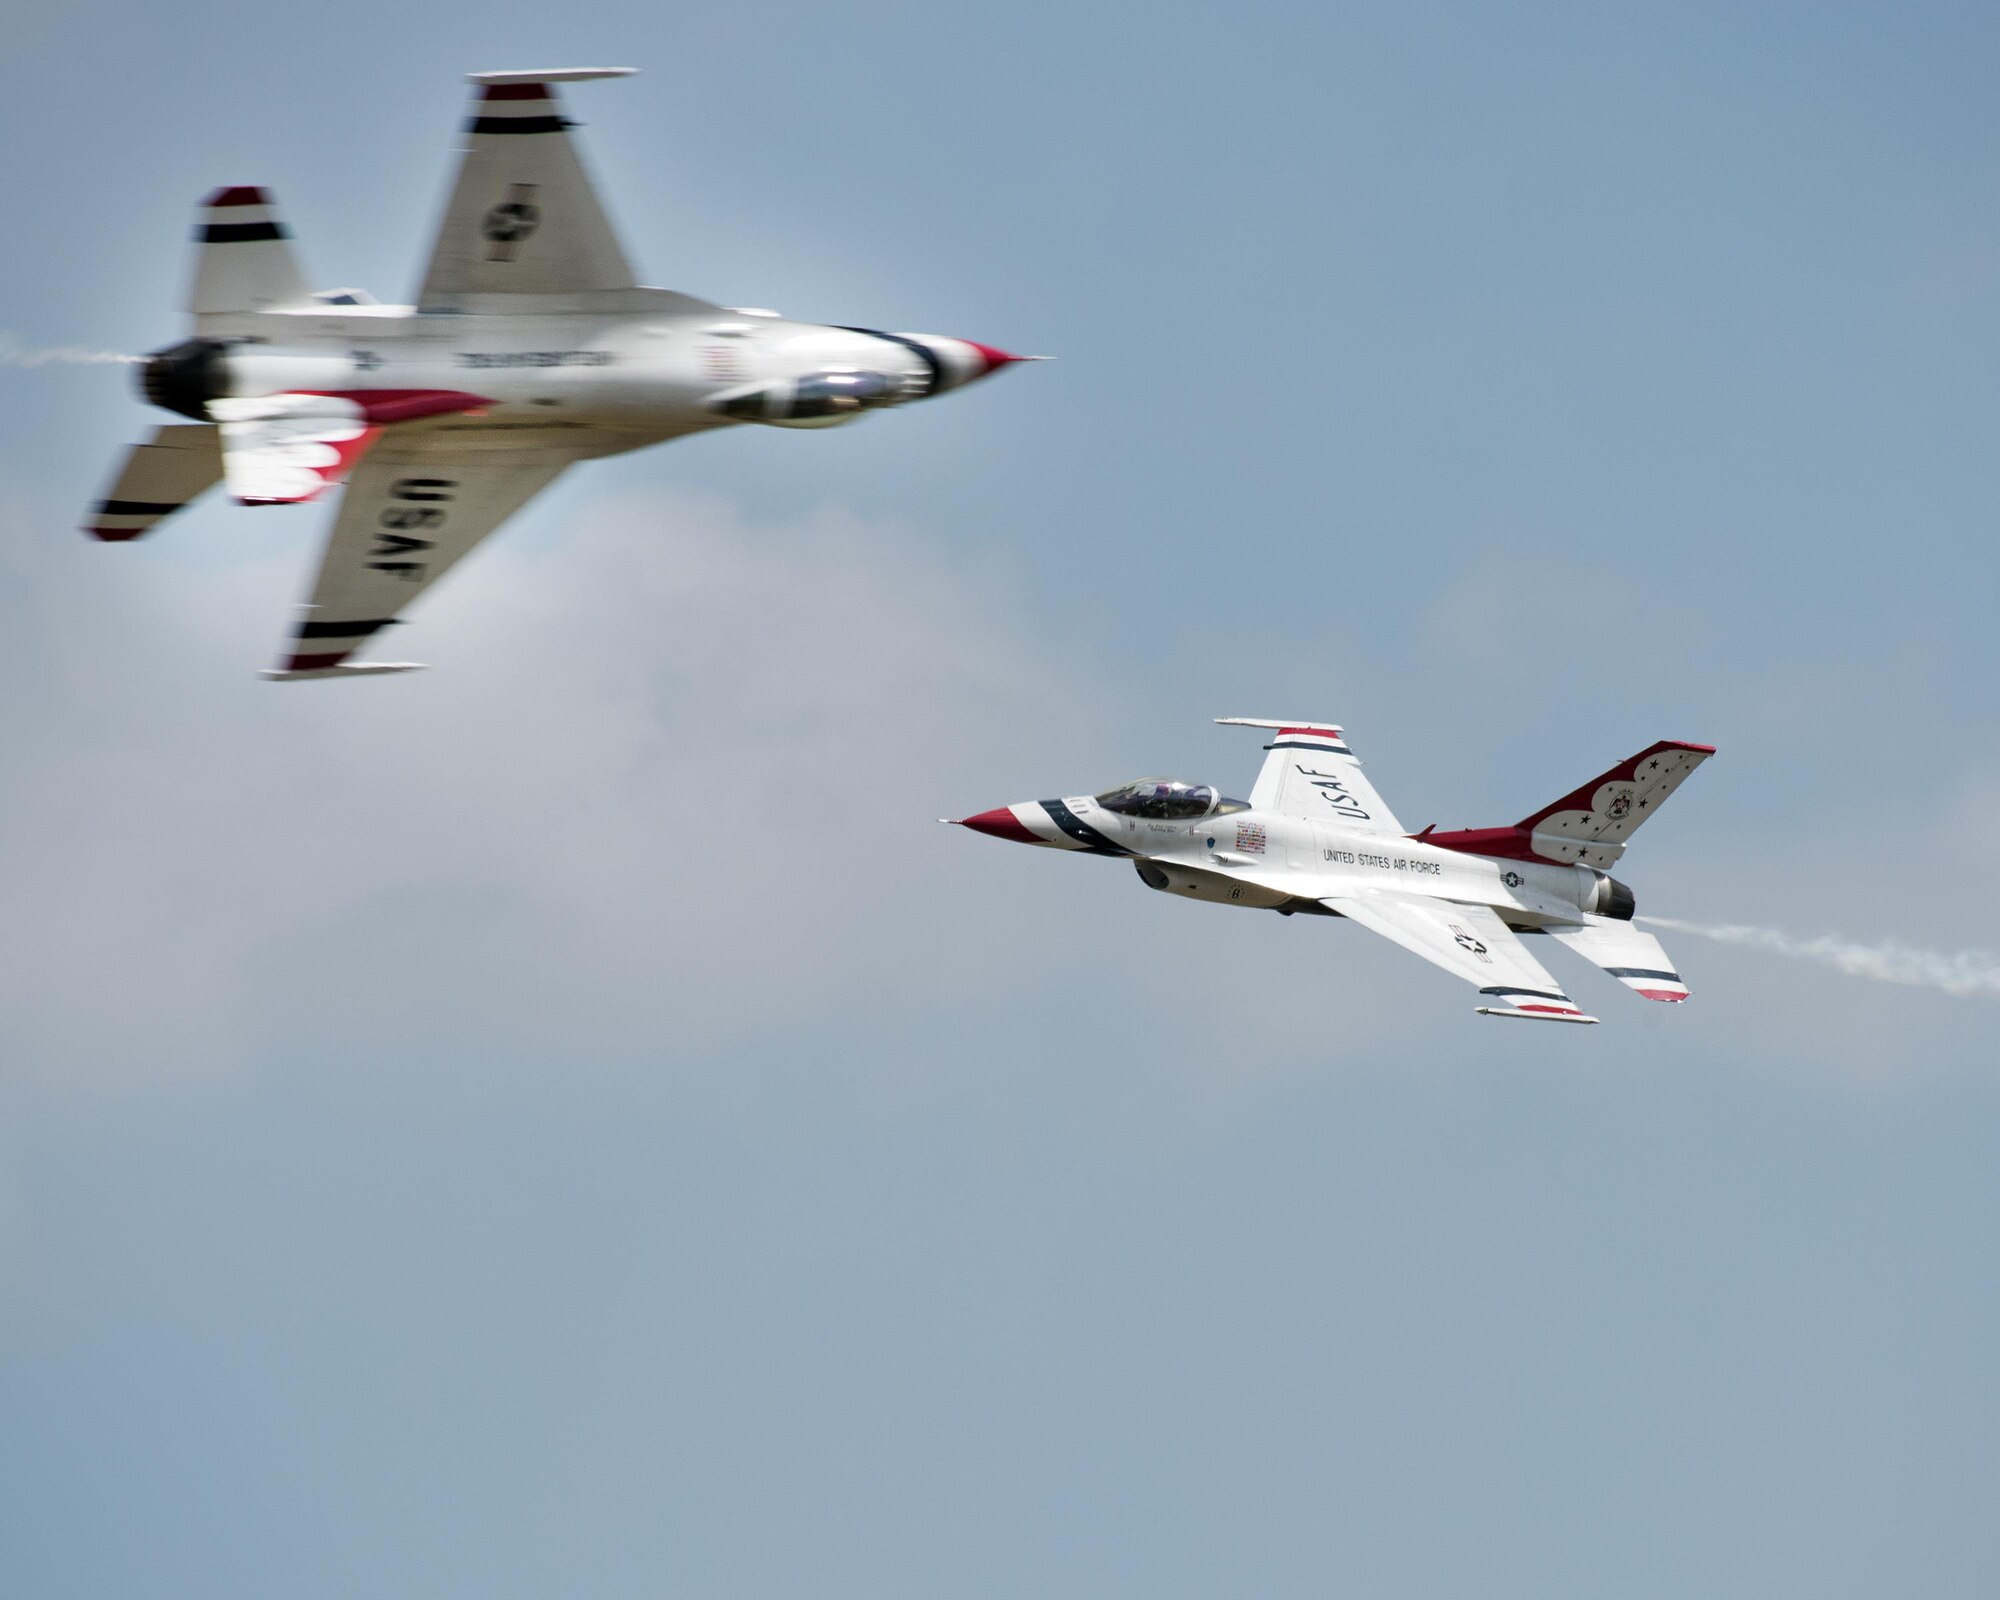 The U.S. Air Force Thunderbirds perform an aerial demonstration during the Wings over Solano Air Show at Travis Air Force Base, Calif., May 6, 2017. The two-day event also featured performances by the U.S. Army Golden Knights parachute team, flyovers and static displays. (U.S. Air Force photo by Louis Briscese)